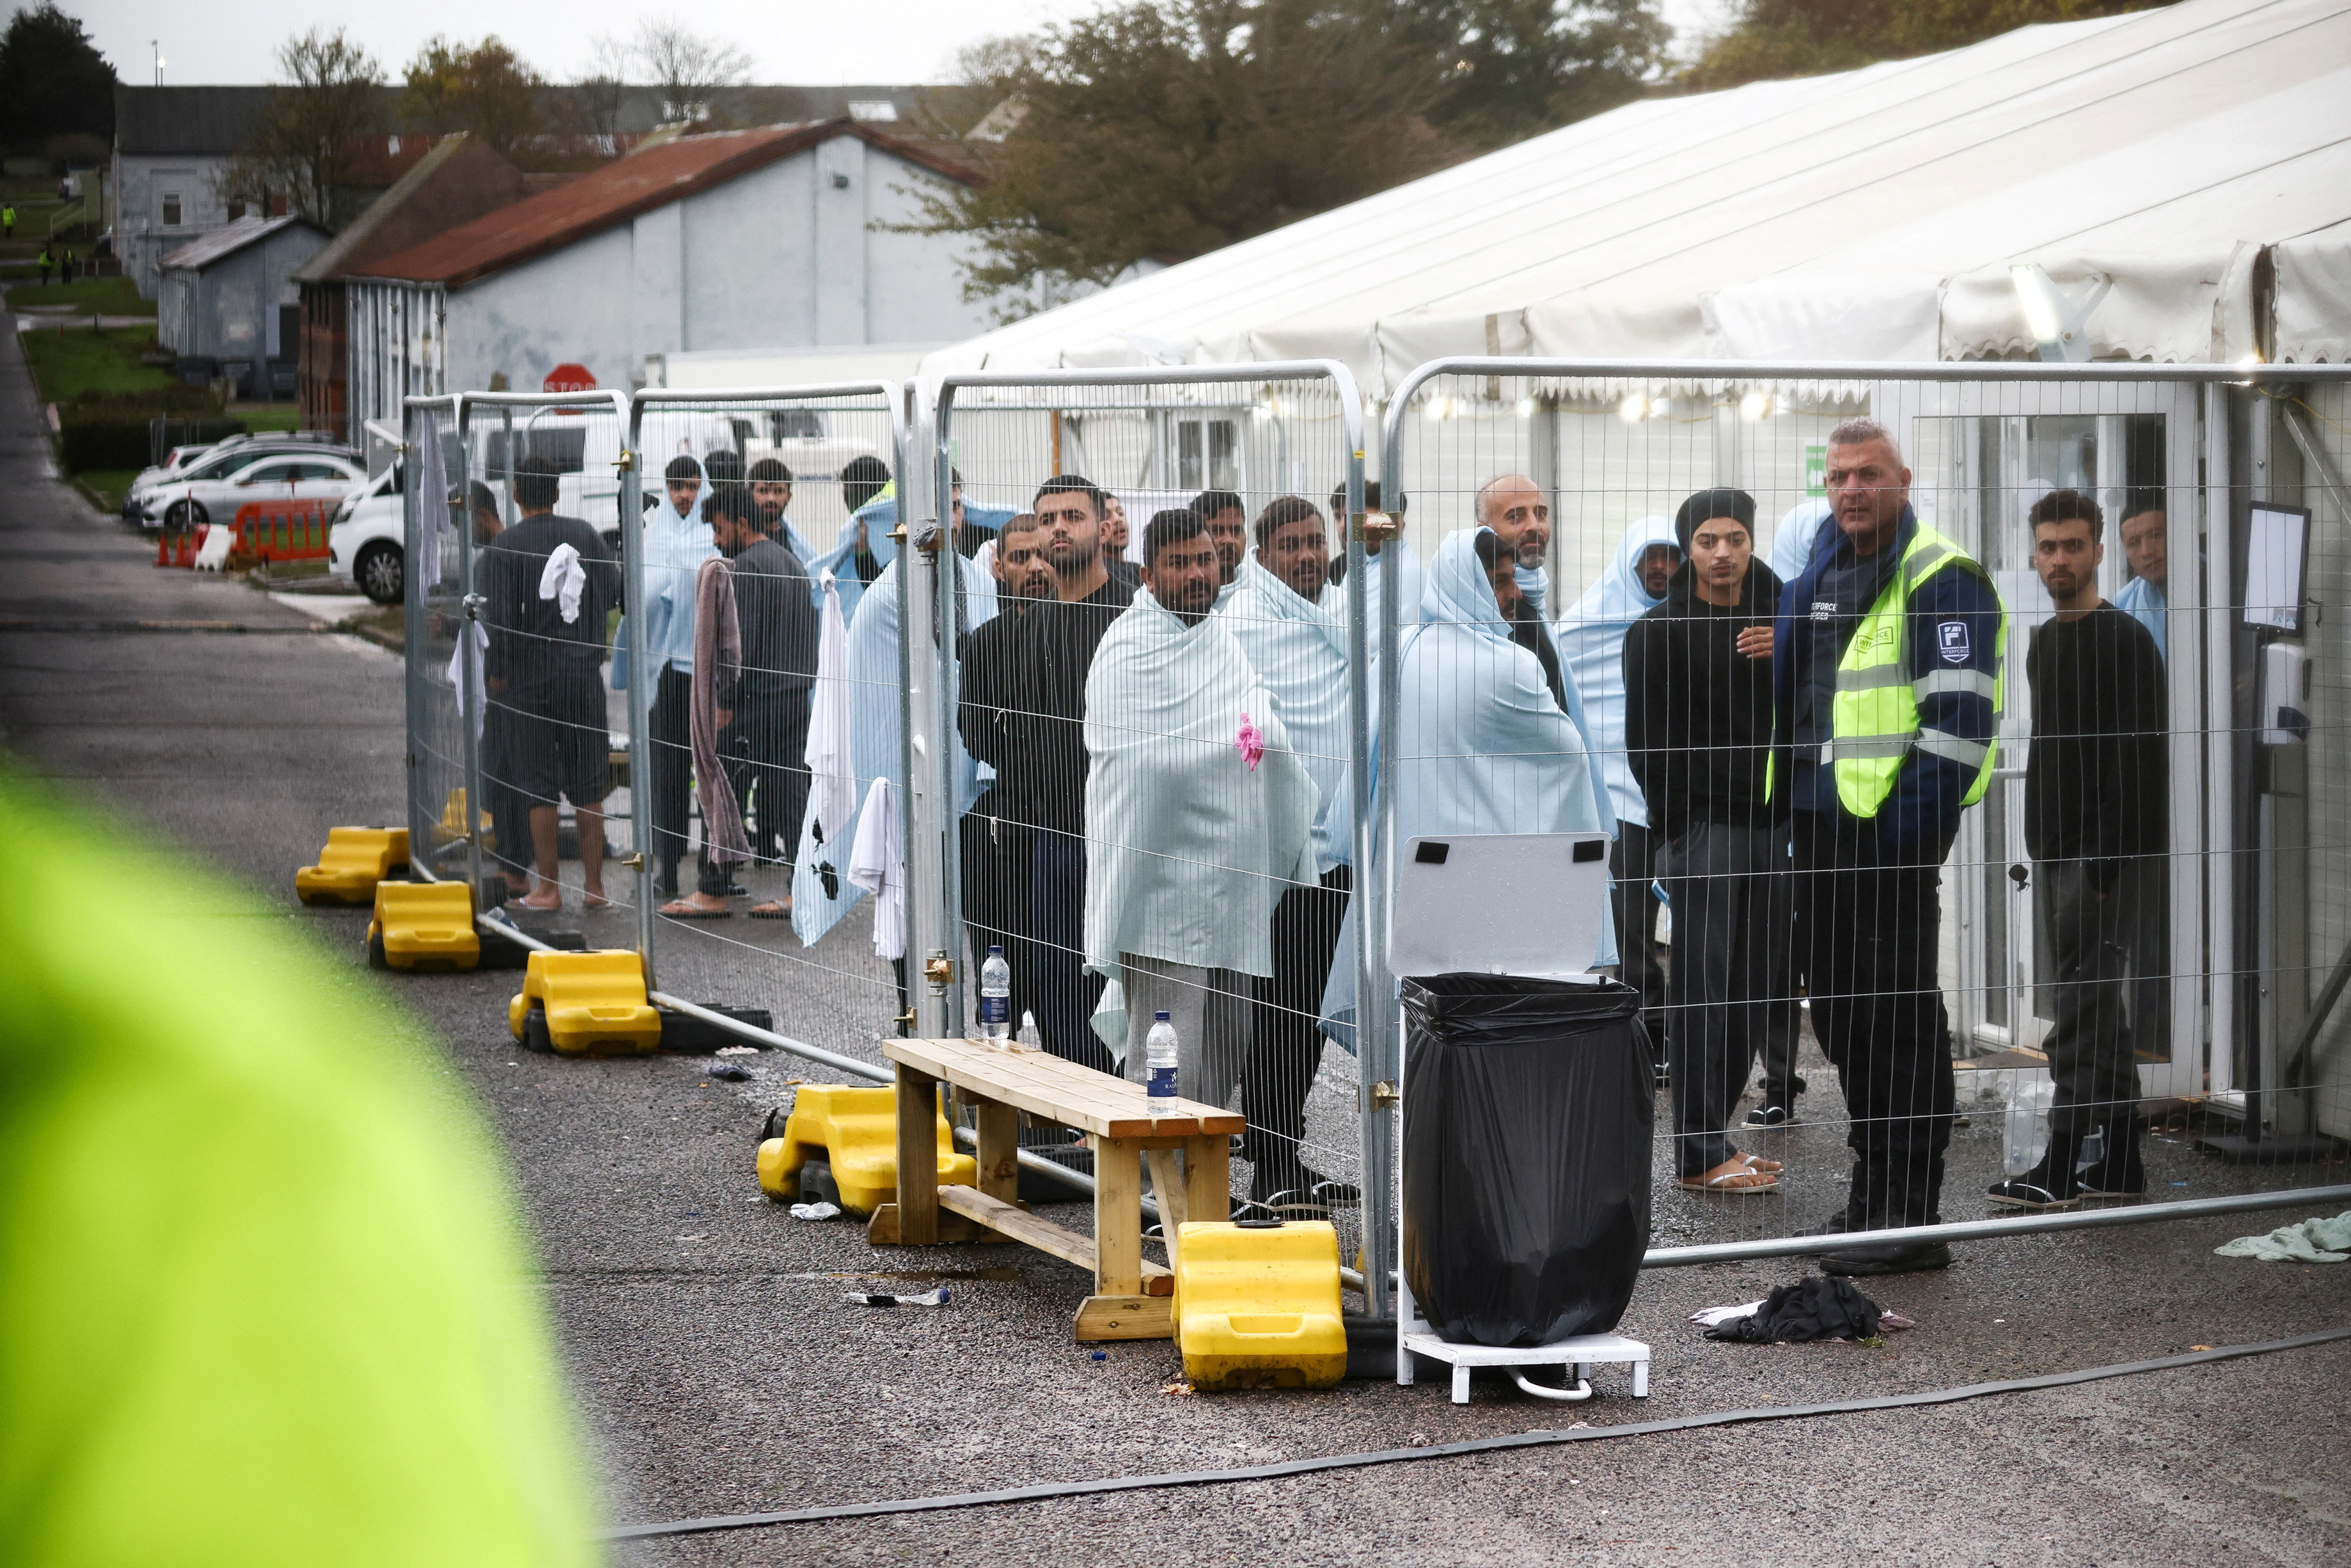 People stand inside a fenced off area inside the migrant processing centre in Manston